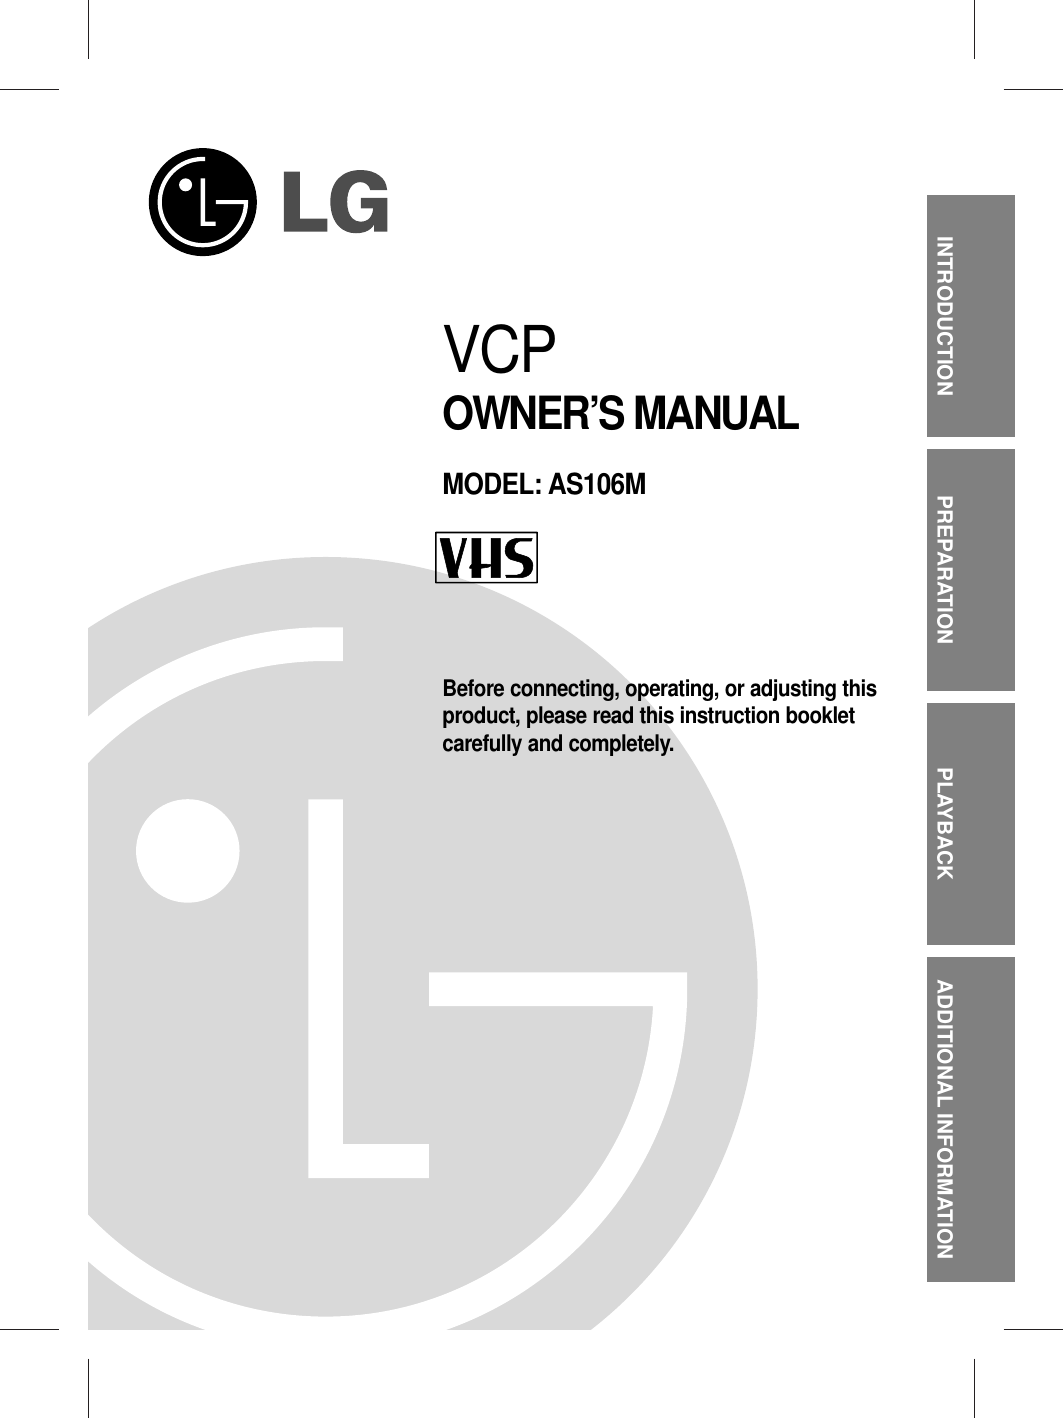 VCPOWNER’S MANUALMODEL: AS106MBefore connecting, operating, or adjusting thisproduct, please read this instruction booklet carefully and completely.INTRODUCTION PREPARATION PLAYBACK ADDITIONAL INFORMATION